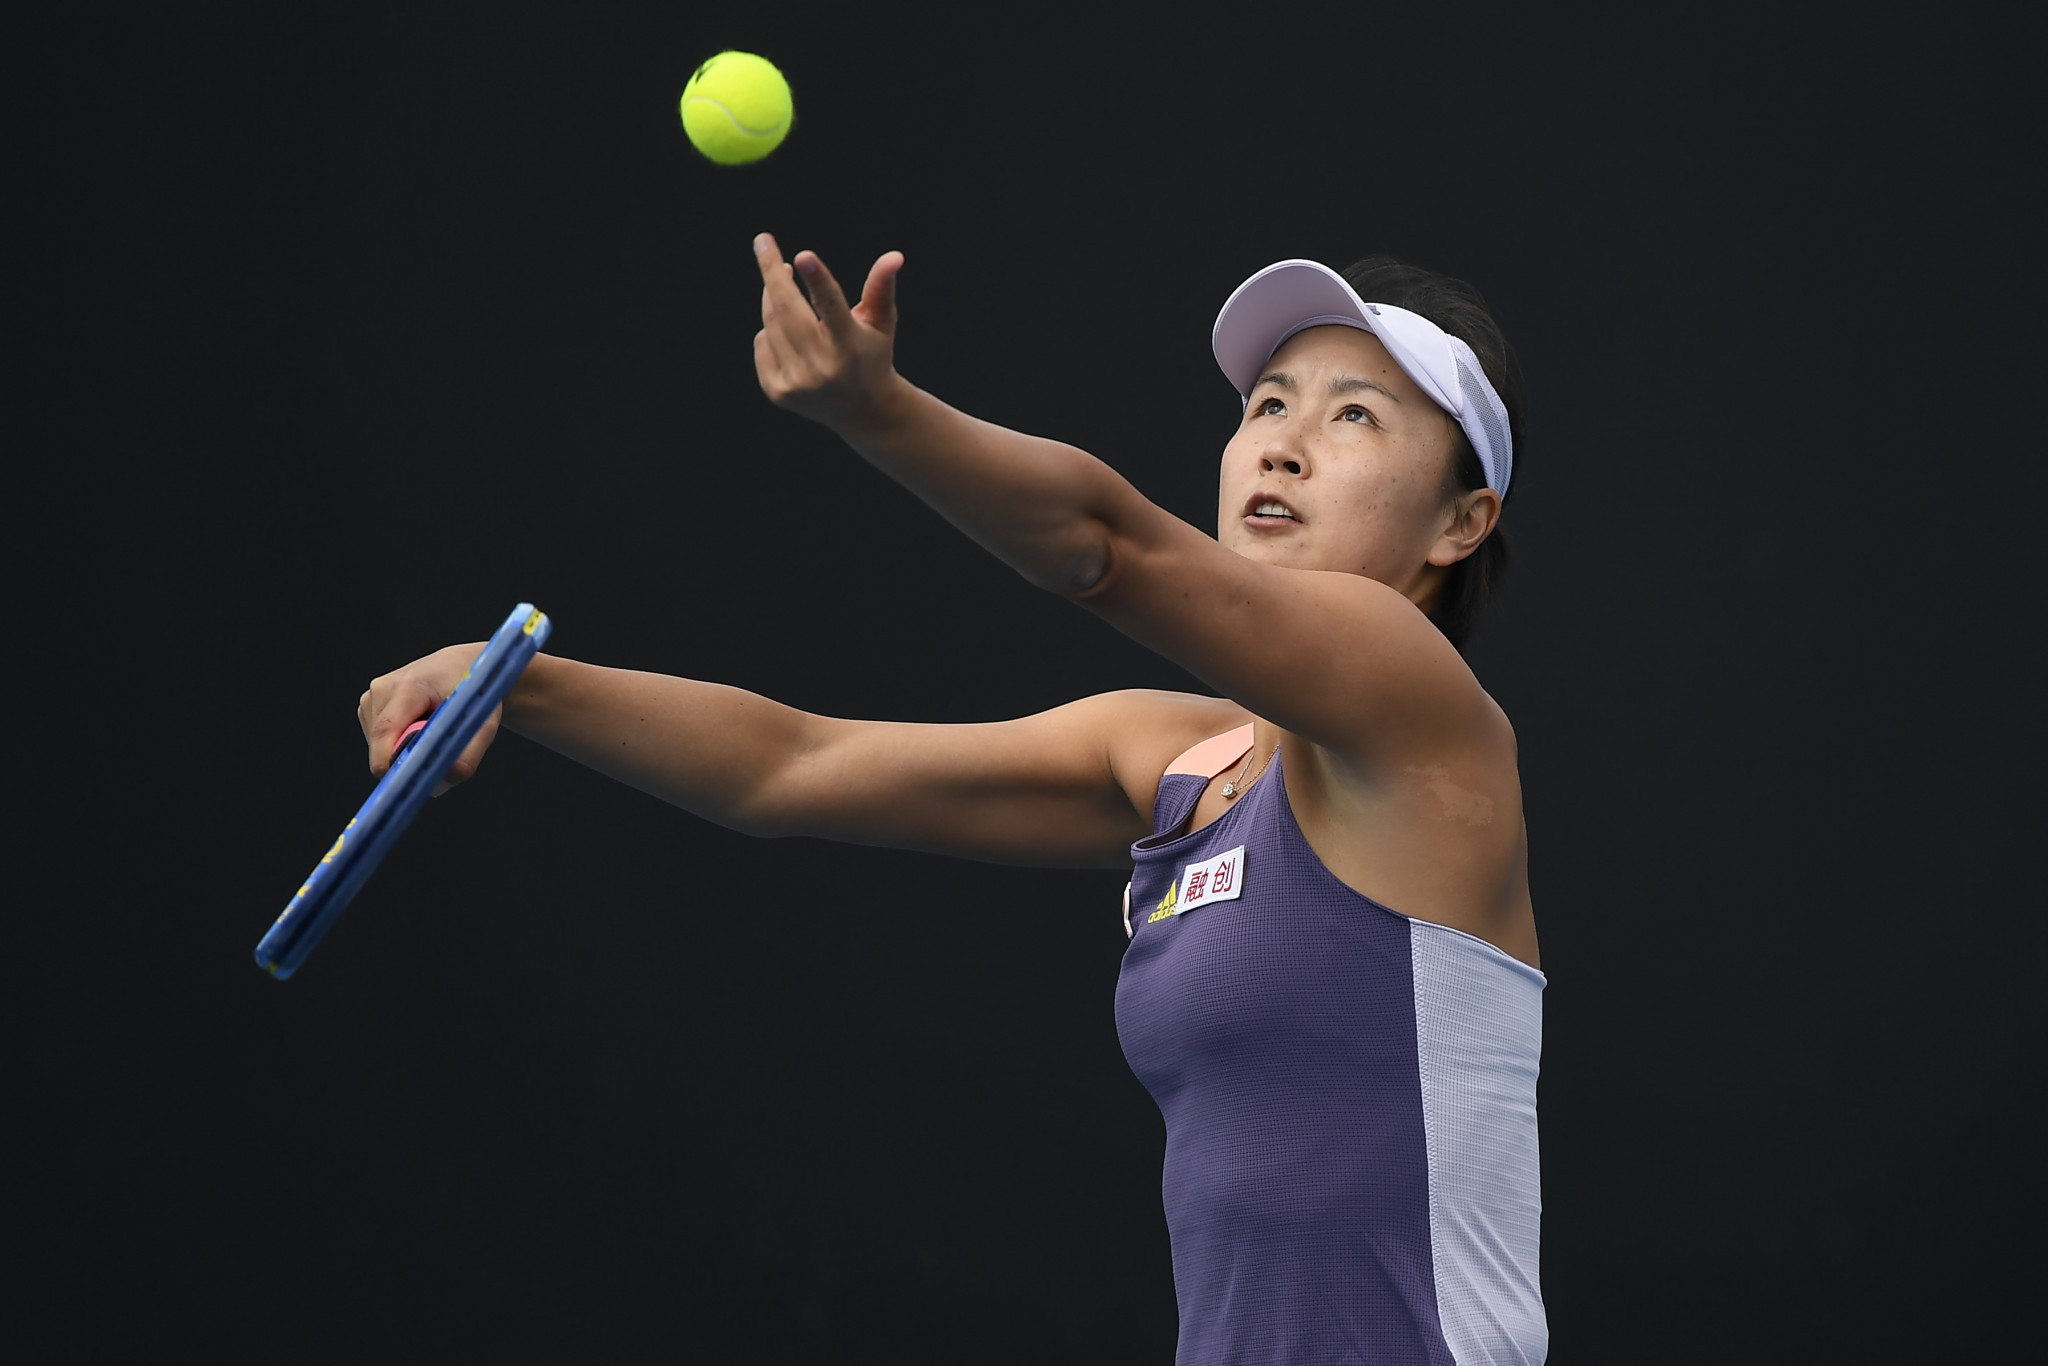 Several players have expressed concern over the welfare of Peng Shuai ©Getty Images